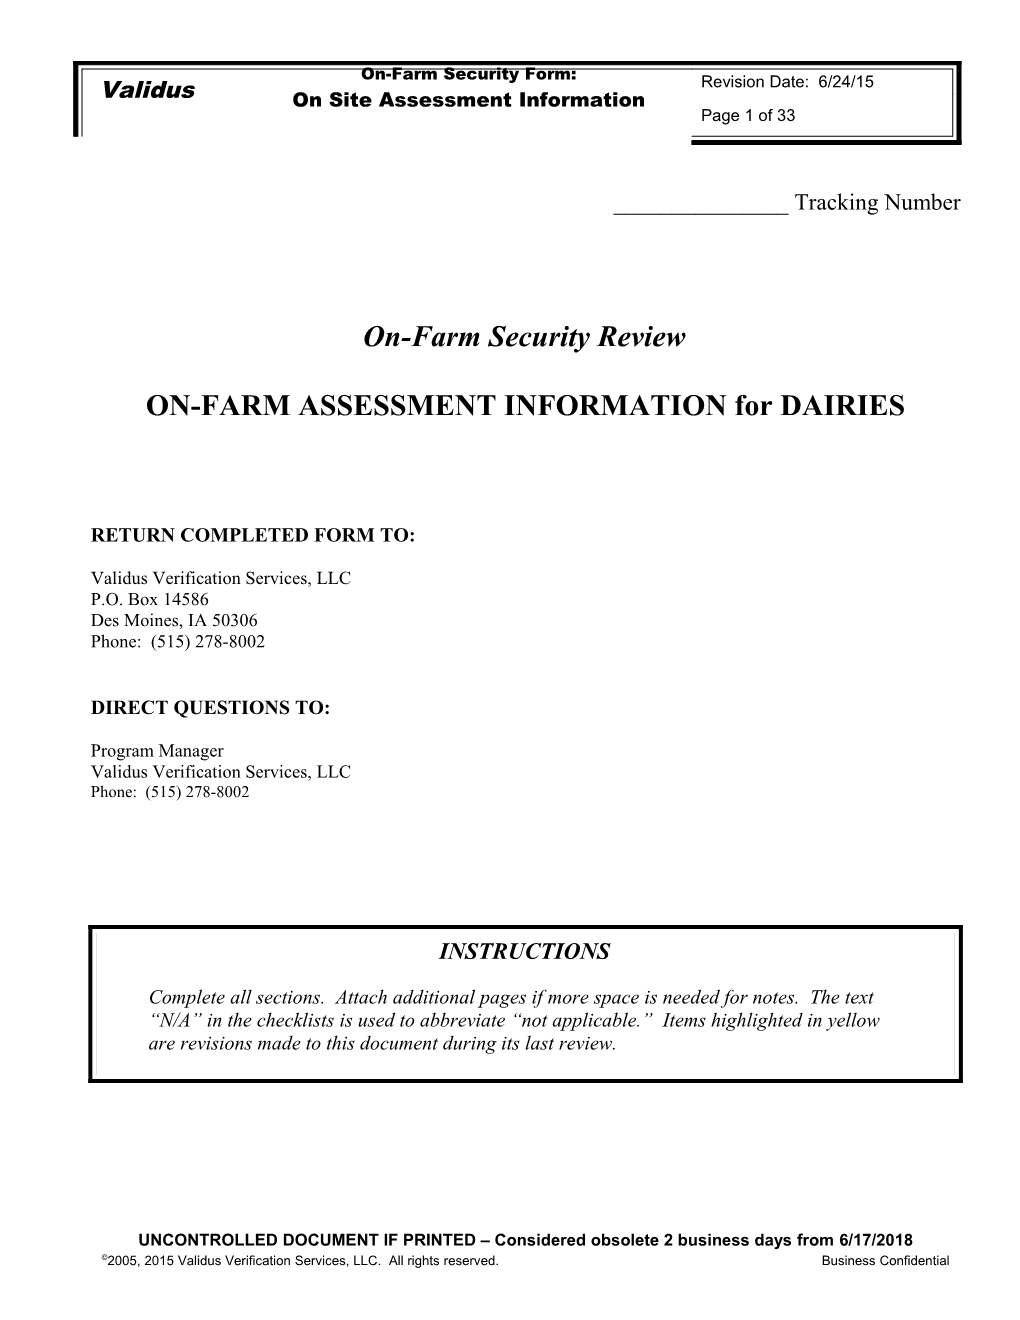 ON-FARM ASSESSMENT INFORMATION for DAIRIES